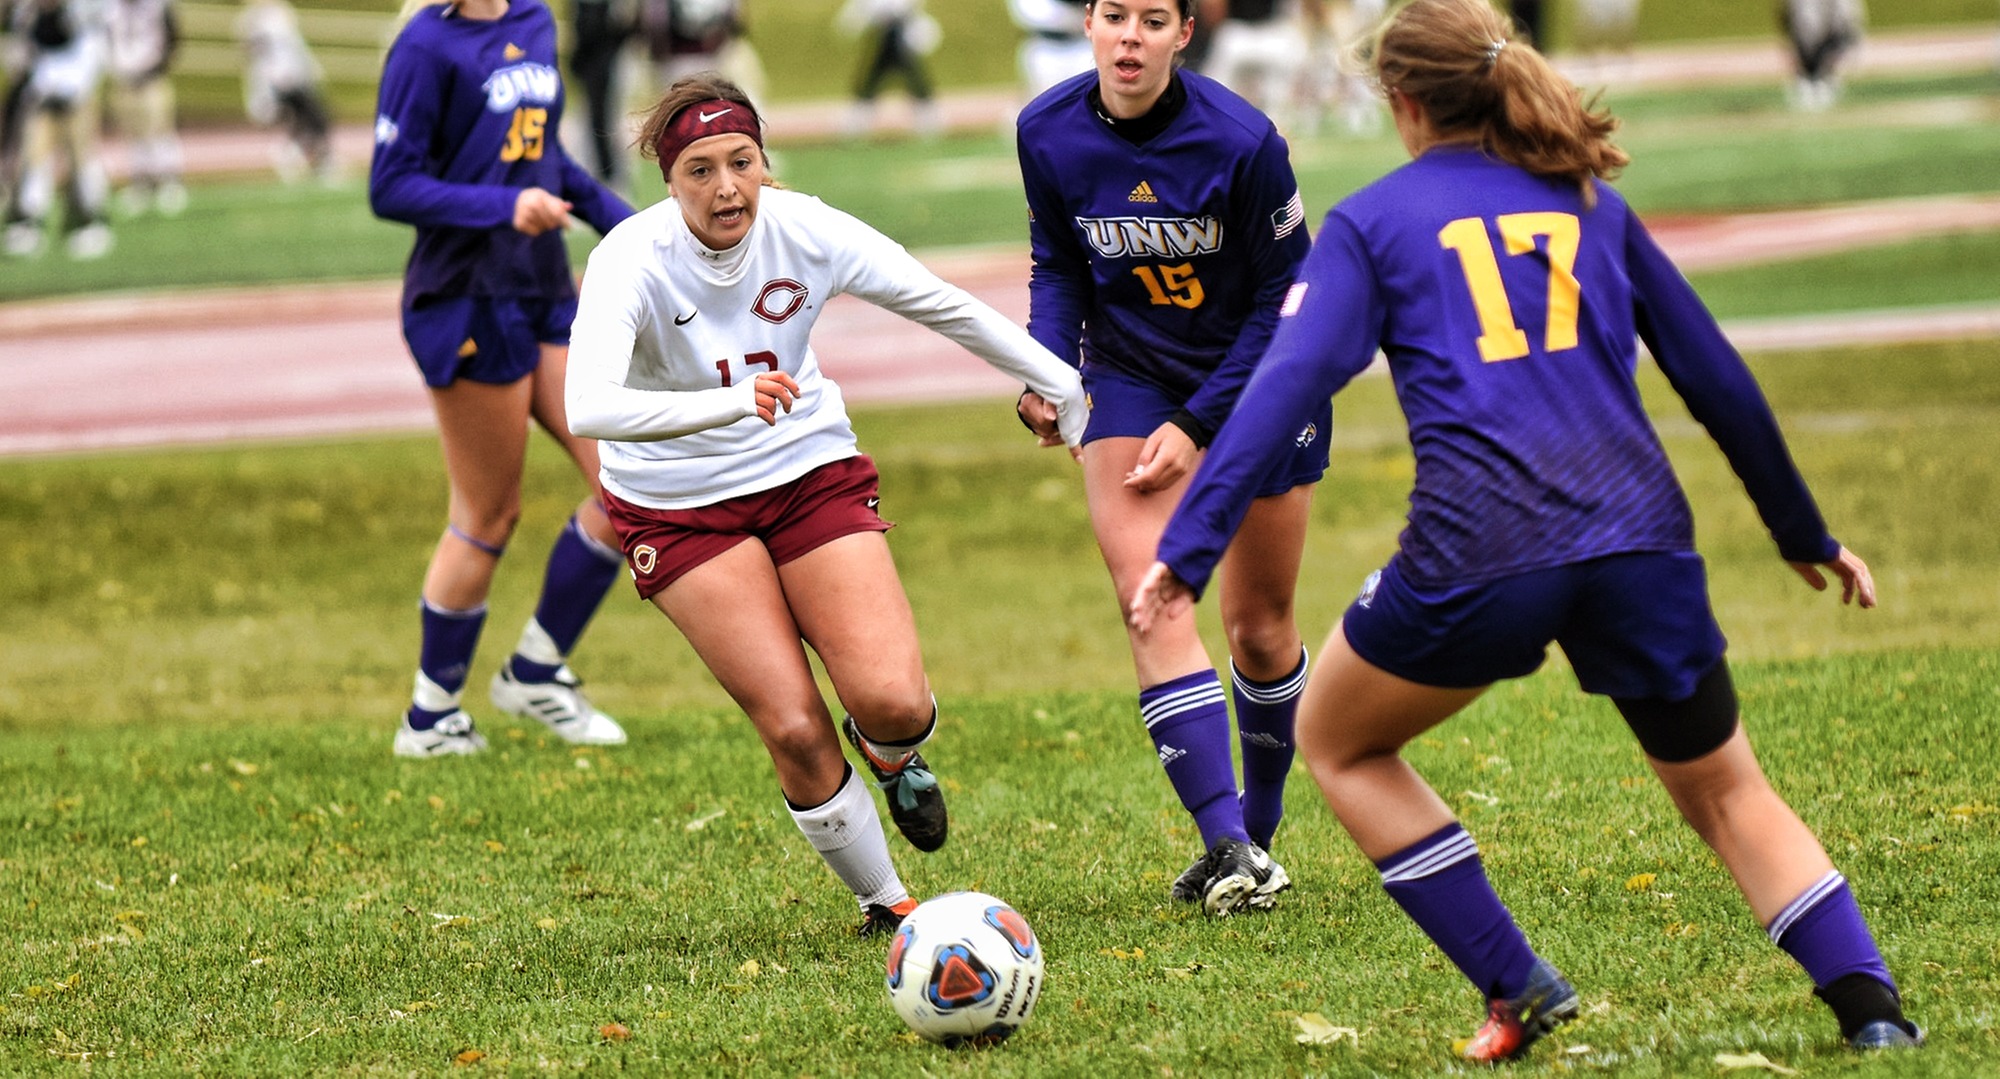 Kalli Baarstad goes after the ball in the second half of the Cobbers' 1-1 2OT tie with Northwestern. She scored the lone goal of the game for CC in the eighth minute of play.